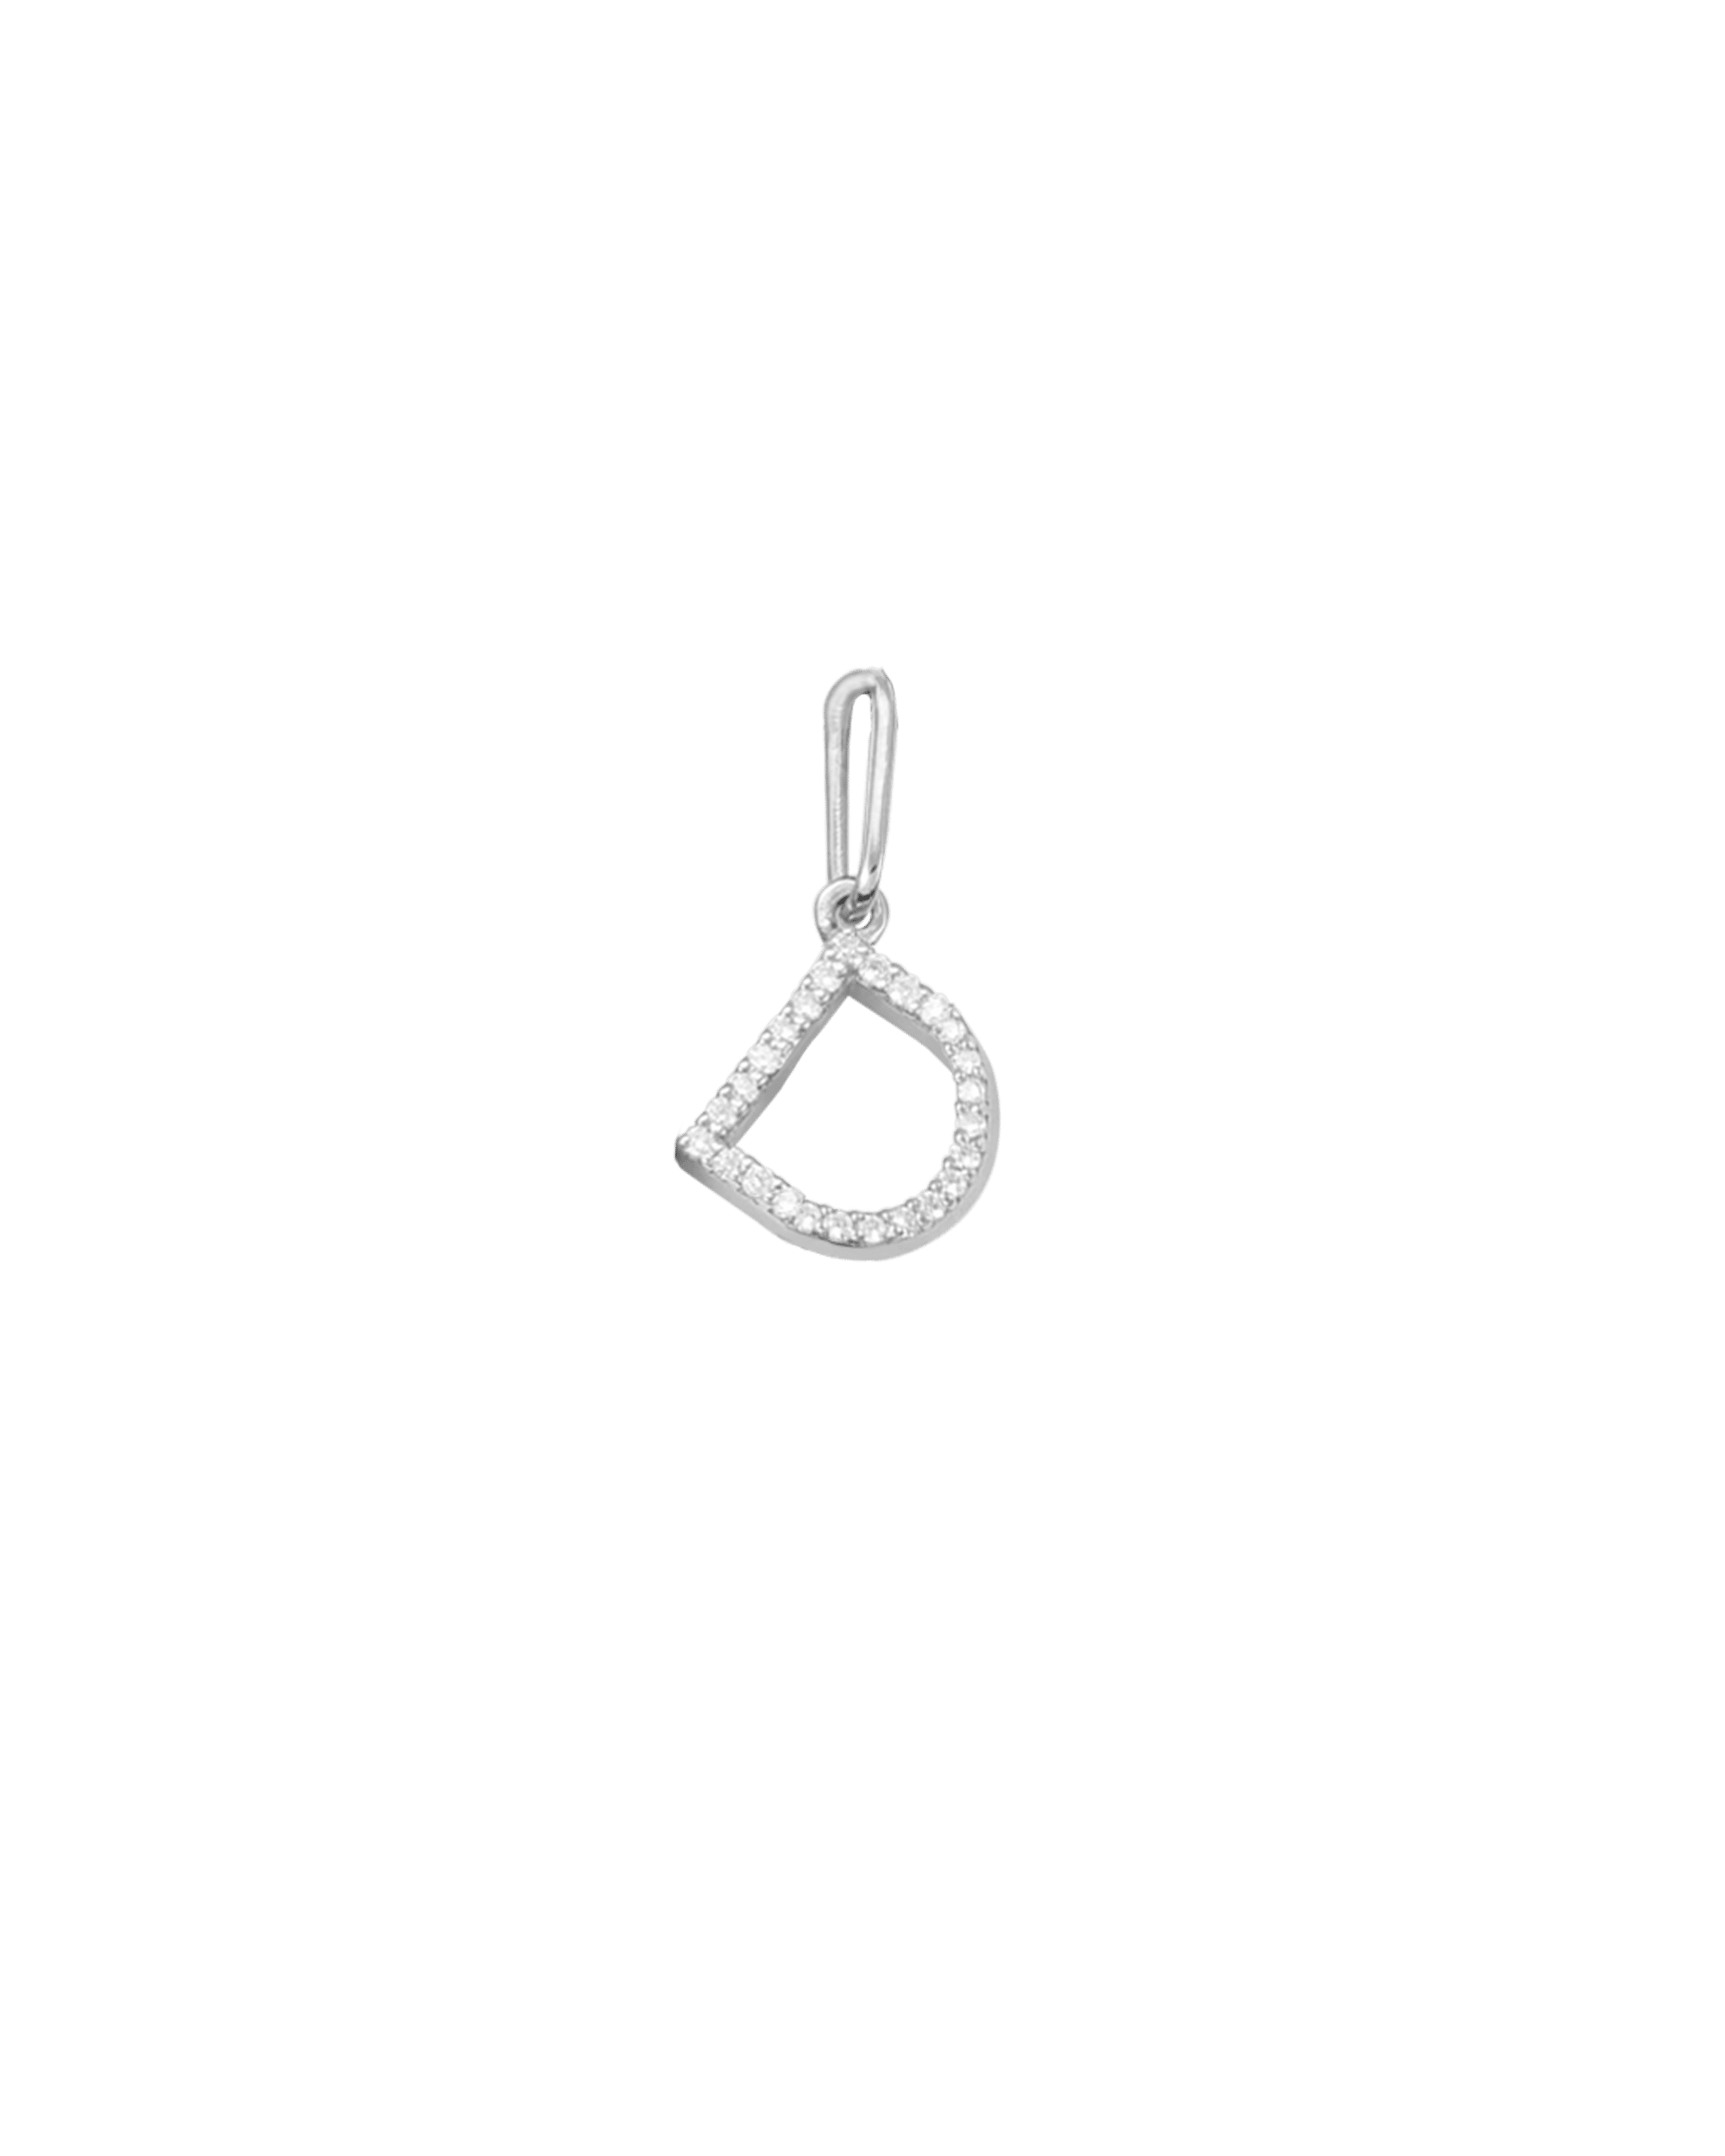 Frosted Charm - 925 Sterling Silver Charm magal-dev 